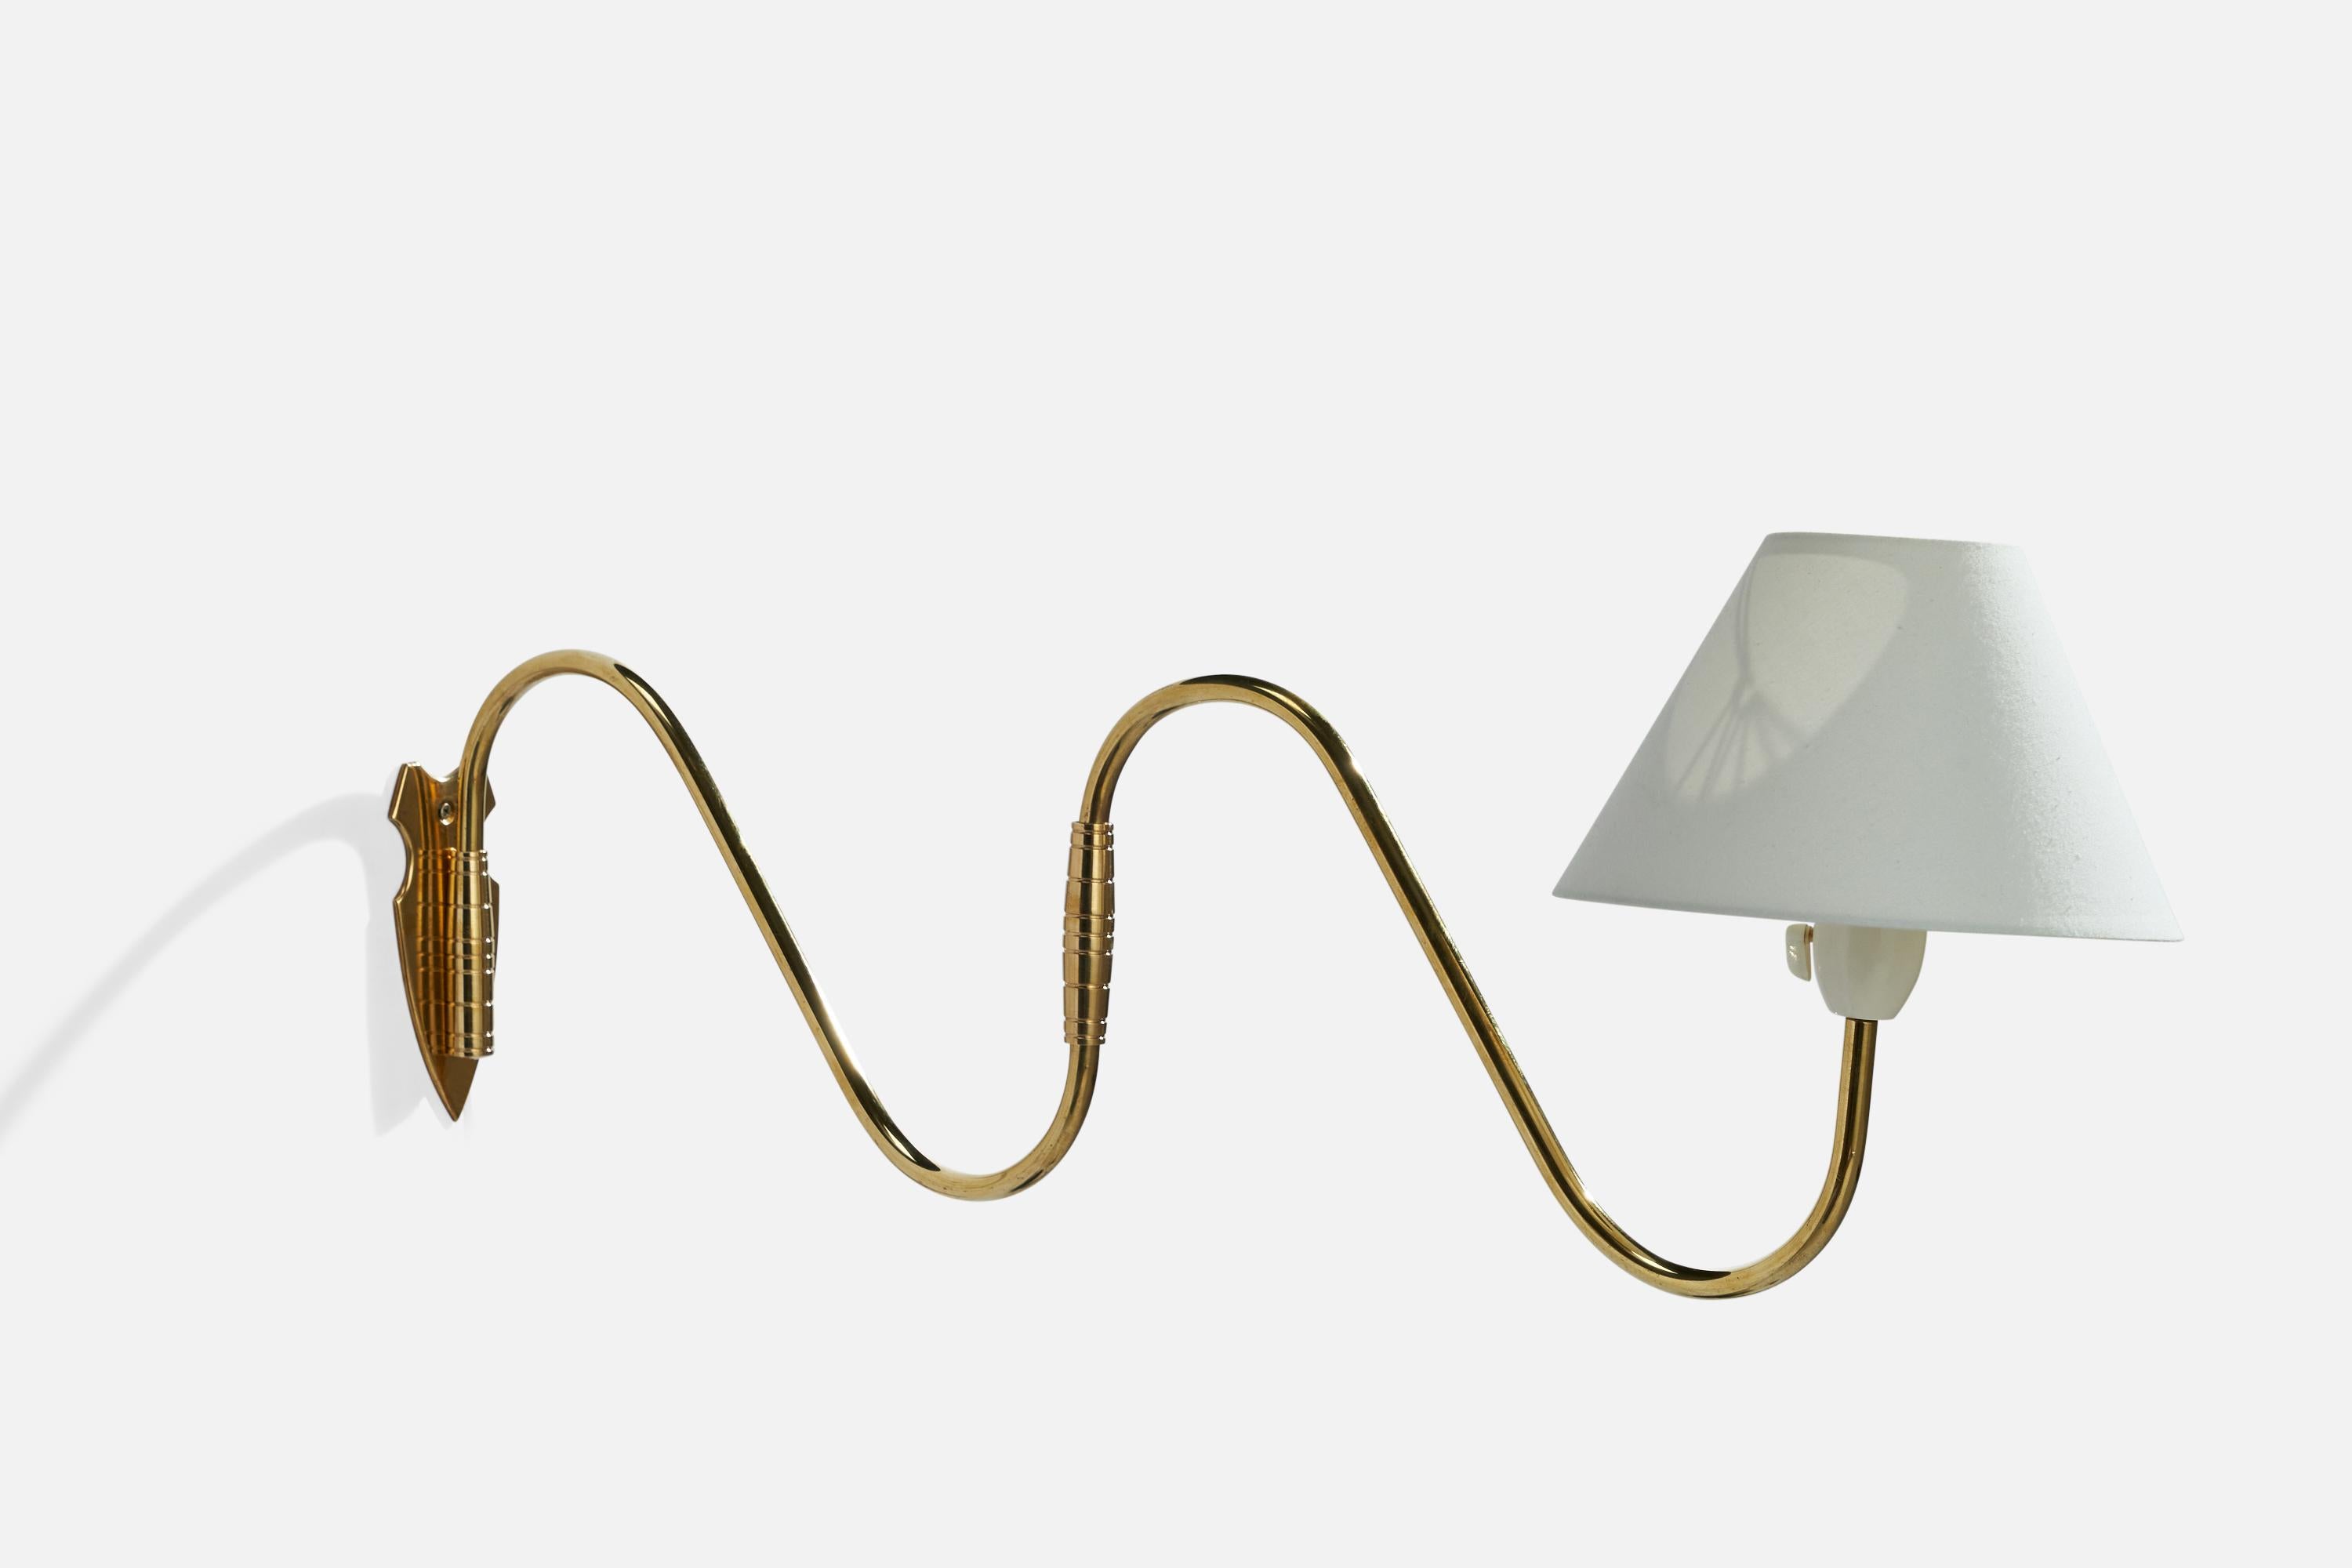 A brass and white fabric wall light designed and produced in Denmark, 1940s.

Overall Dimensions (inches): 7” H x 24”  W x 25.50” D
Back Plate Dimensions (inches): 5.5”  H x 2.25” W x .25”  D
Bulb Specifications: E-26 Bulb
Number of Sockets: 1
All